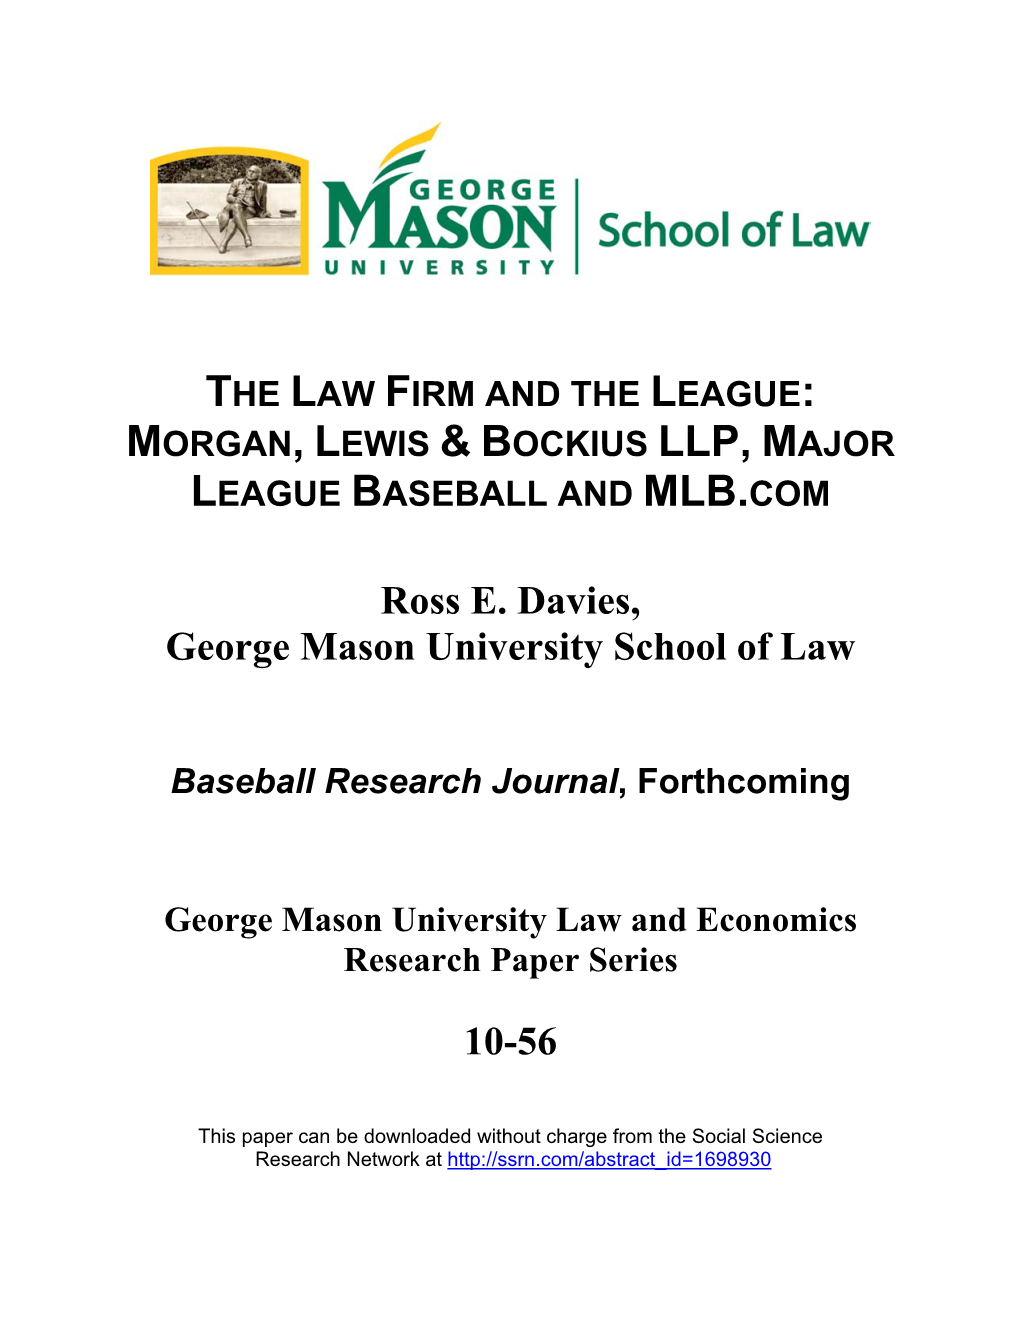 Ross E. Davies, the Law Firm and the League 2010-10-26 to SSRN